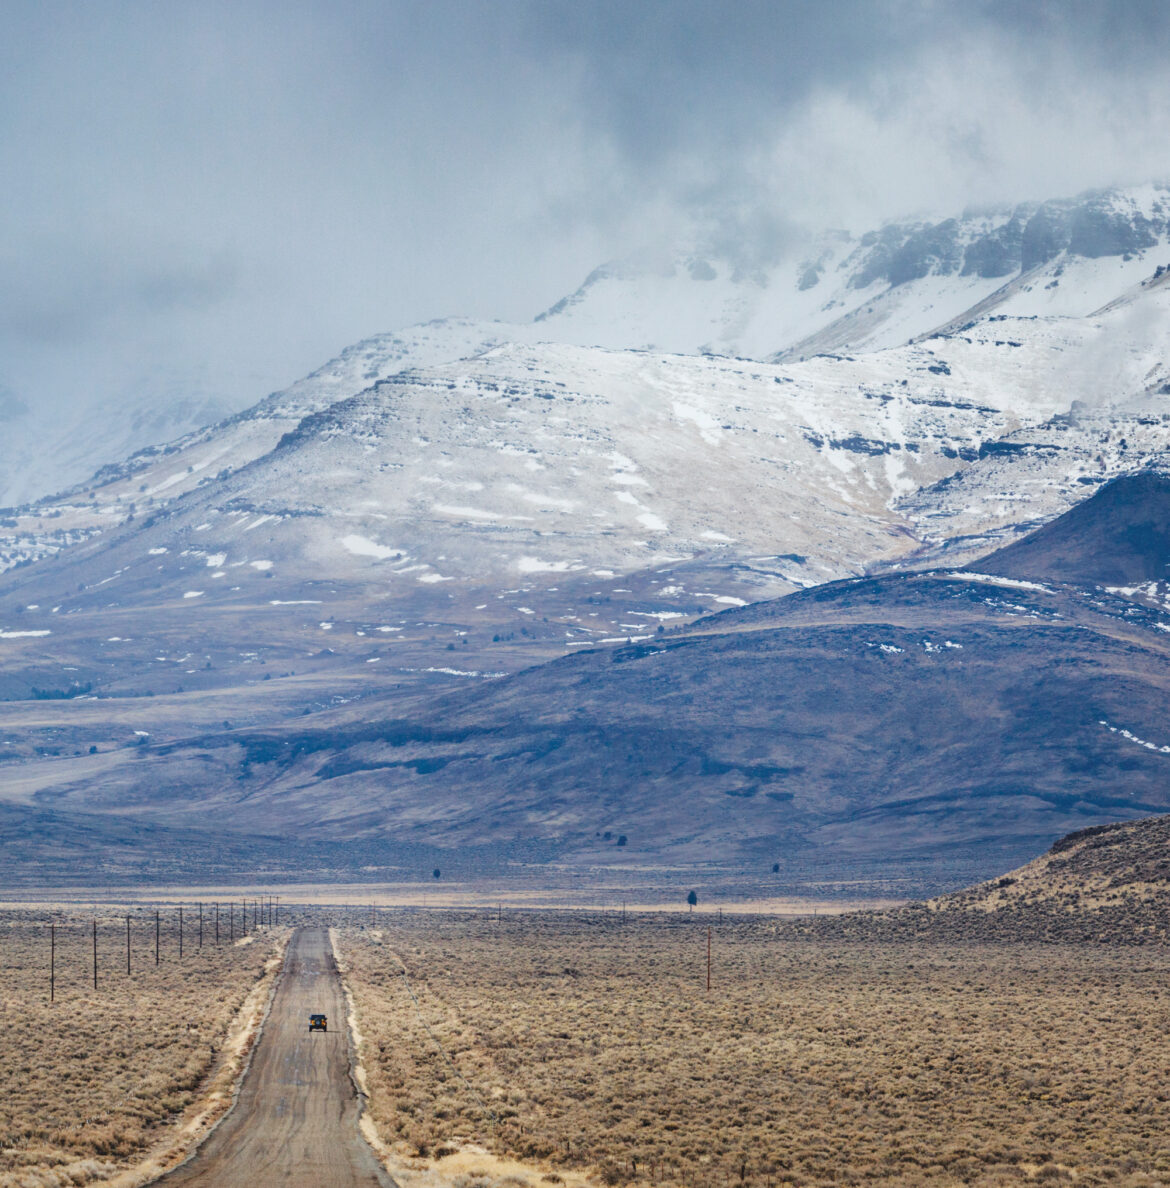 Steens Mountain in winter is an exhilarating outing in showshoes or backcountry skis.